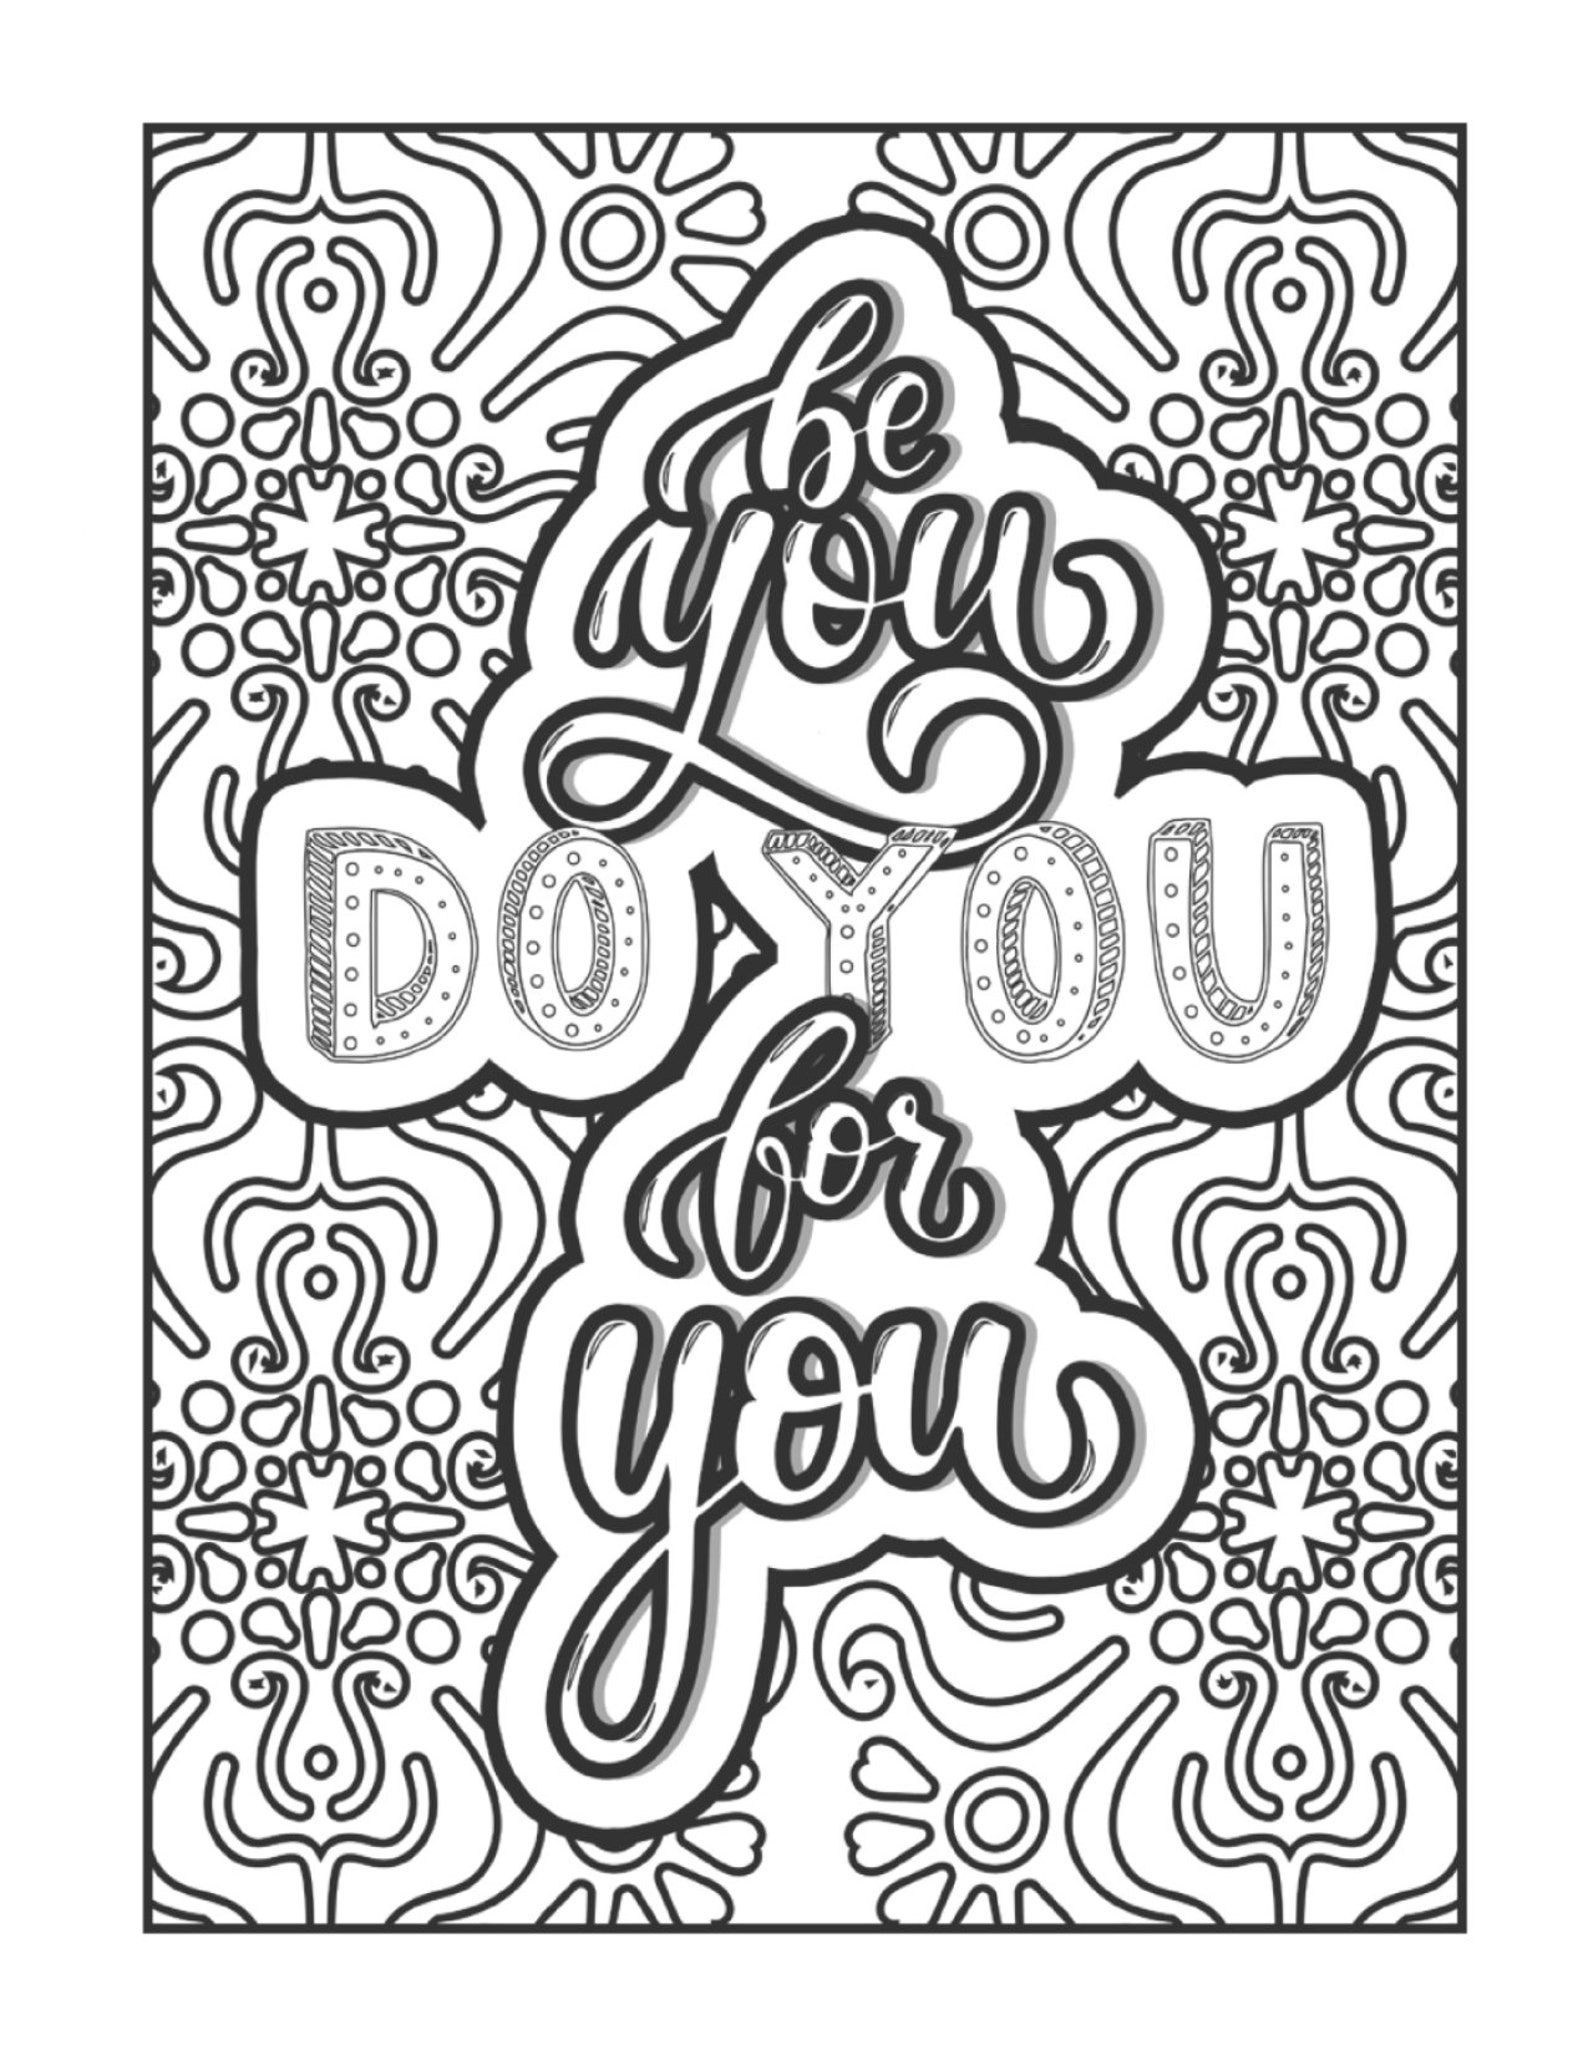 100 Adult Coloring Pages for Stress Reliefprintable PDF - Etsy